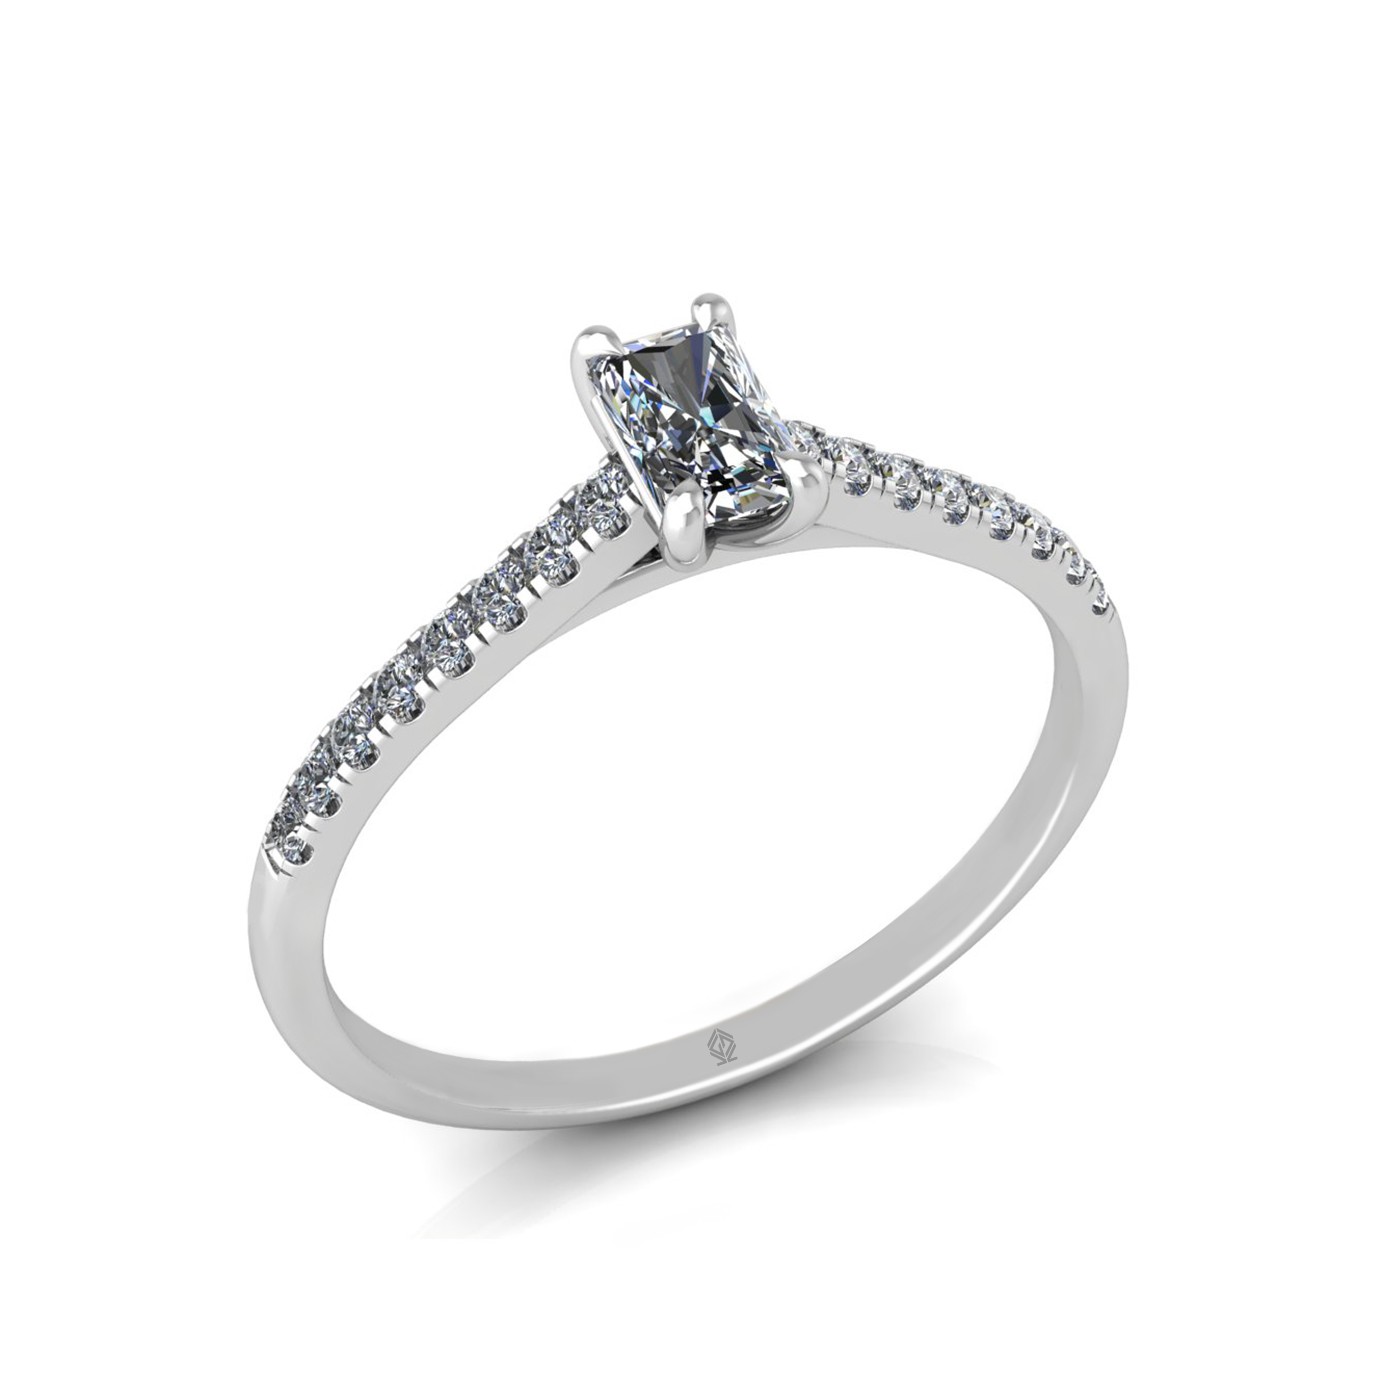 18k white gold  0,30 ct 4 prongs radiant cut diamond engagement ring with whisper thin pavÉ set band